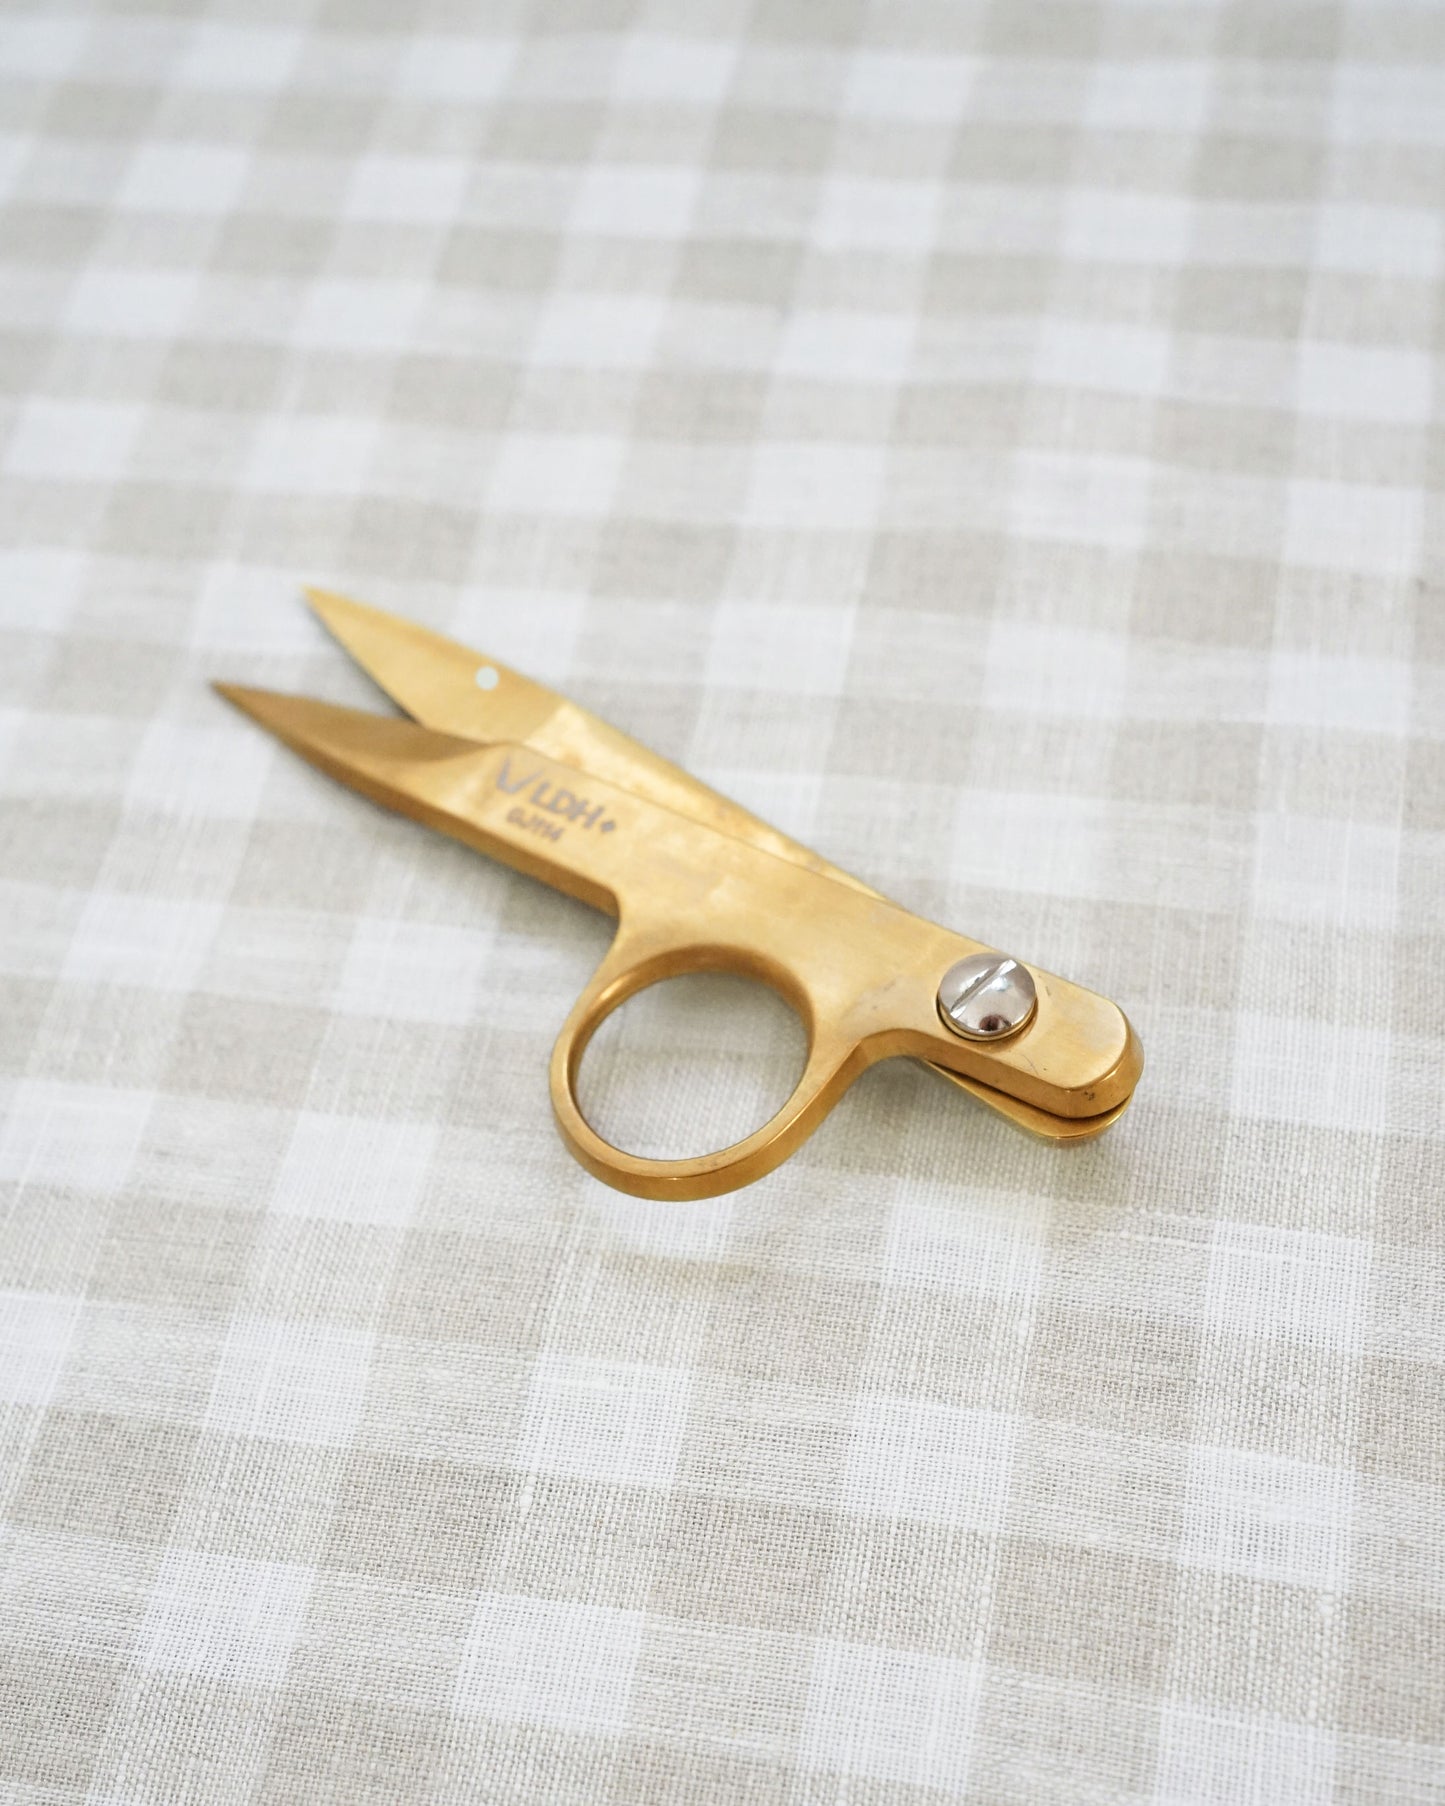 Gold Imperial Thread Snips